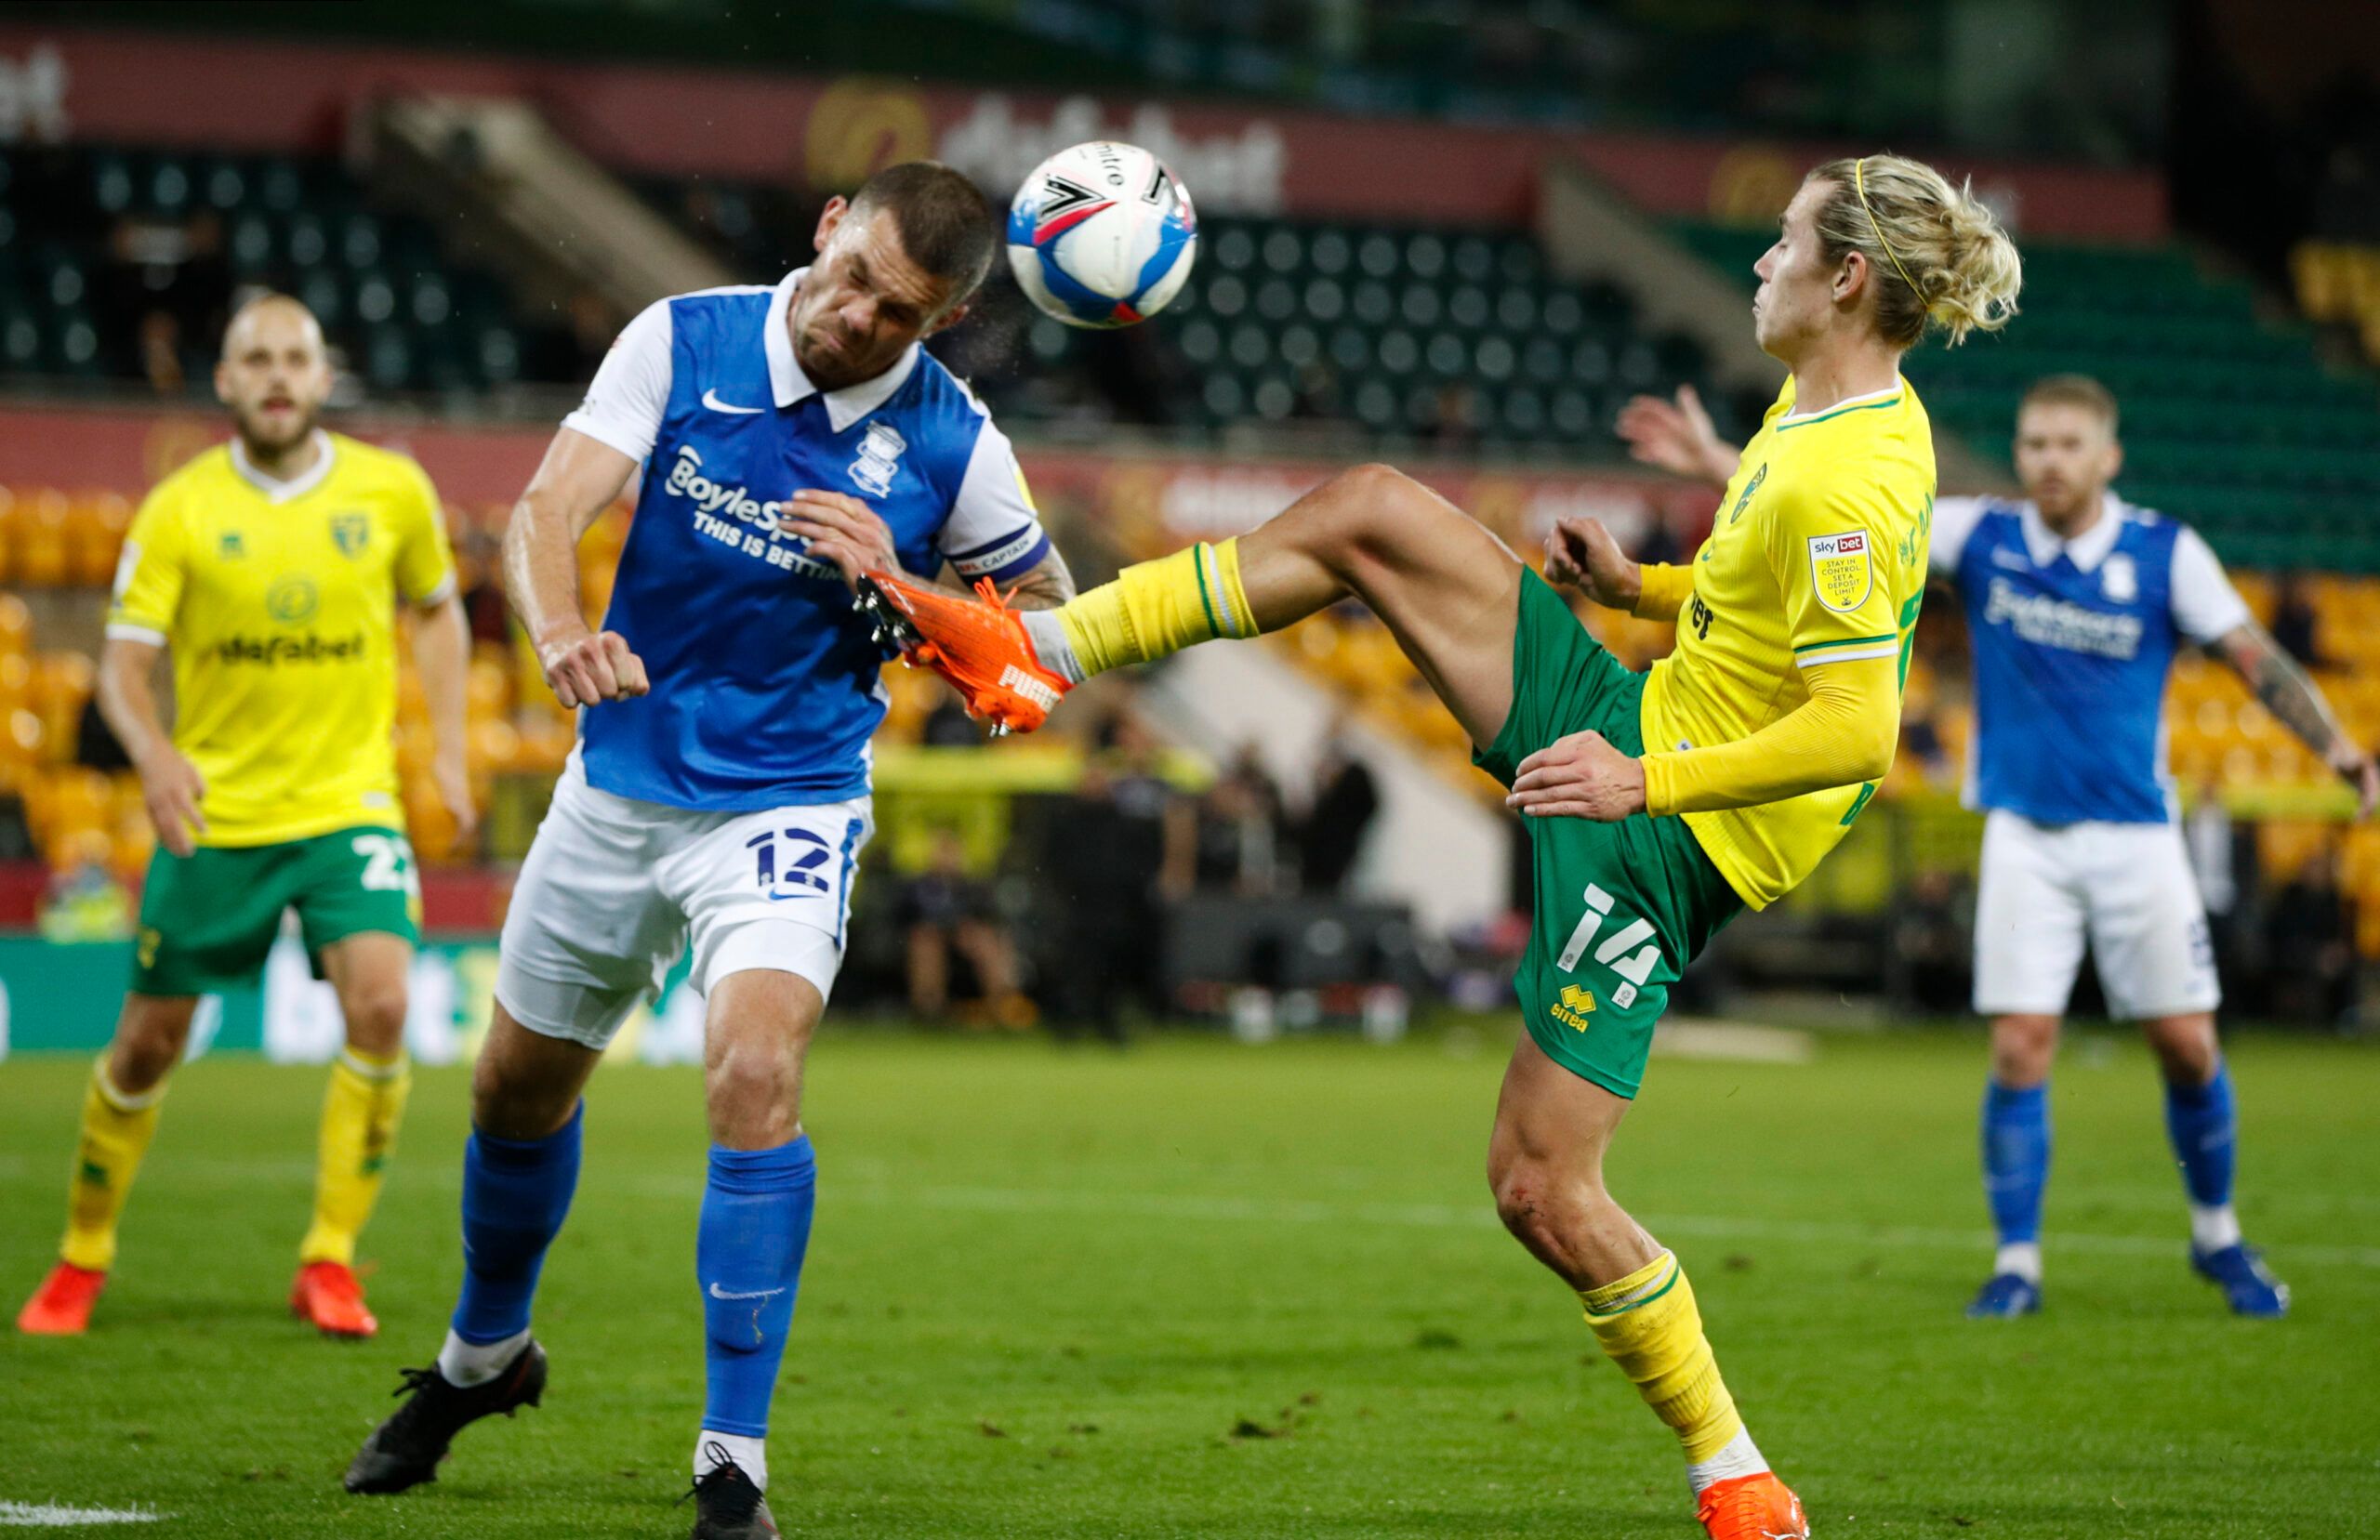 Soccer Football - Championship - Norwich City v Birmingham City - Carrow Road, Norwich, Britain - October 20, 2020 Norwich City's Todd Cantwell in action with Birmingham City's Harlee Dean Action Images/John Sibley EDITORIAL USE ONLY. No use with unauthorized audio, video, data, fixture lists, club/league logos or 'live' services. Online in-match use limited to 75 images, no video emulation. No use in betting, games or single club /league/player publications.  Please contact your account represe